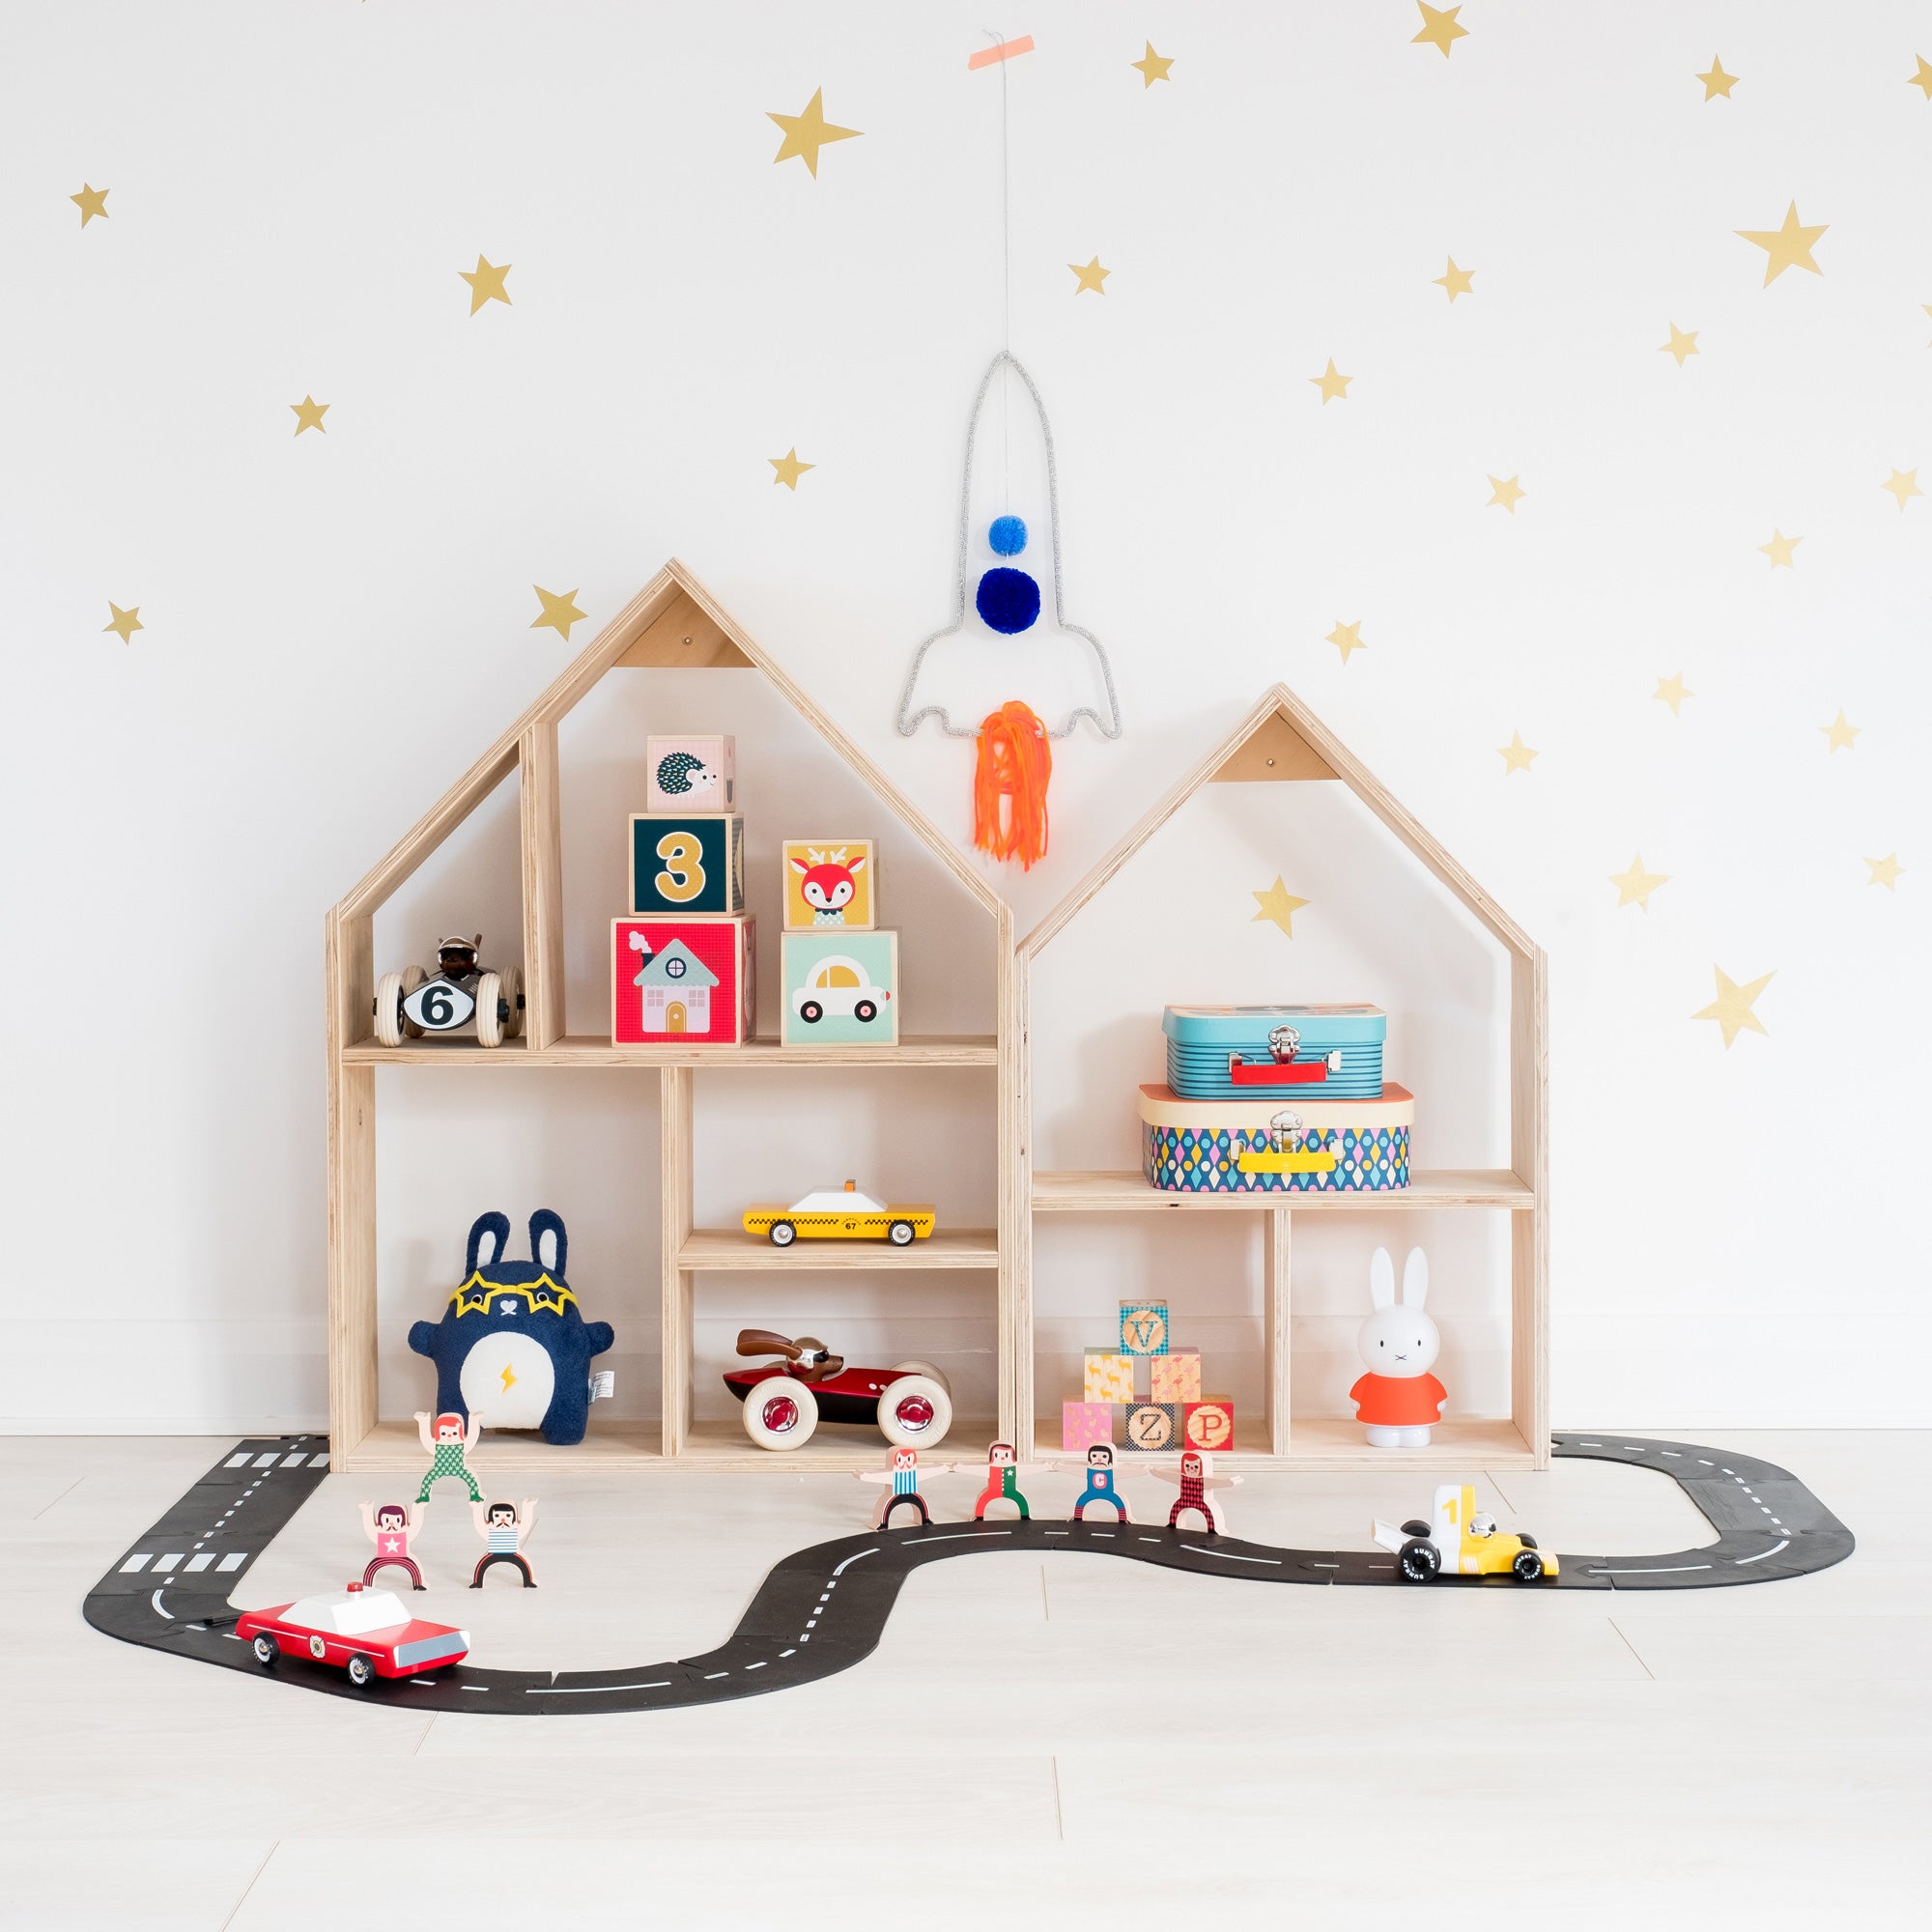 Children's Toys and Accessories, available at Bobby Rabbit.